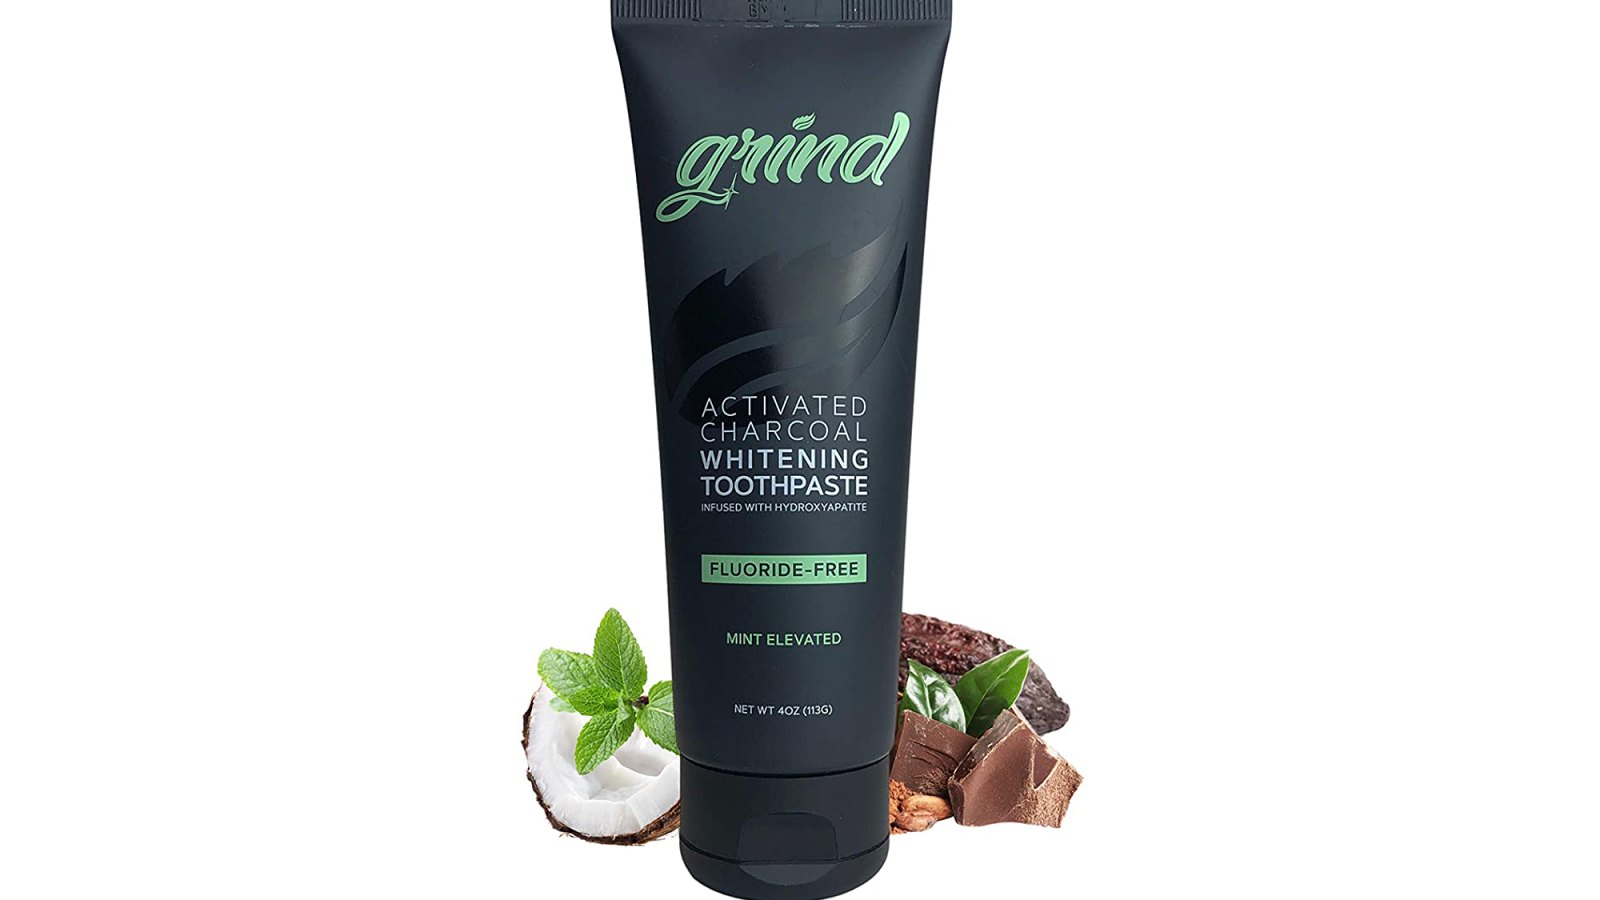 Grind Activated Charcoal Teeth Whitening Fluoride Free Toothpaste